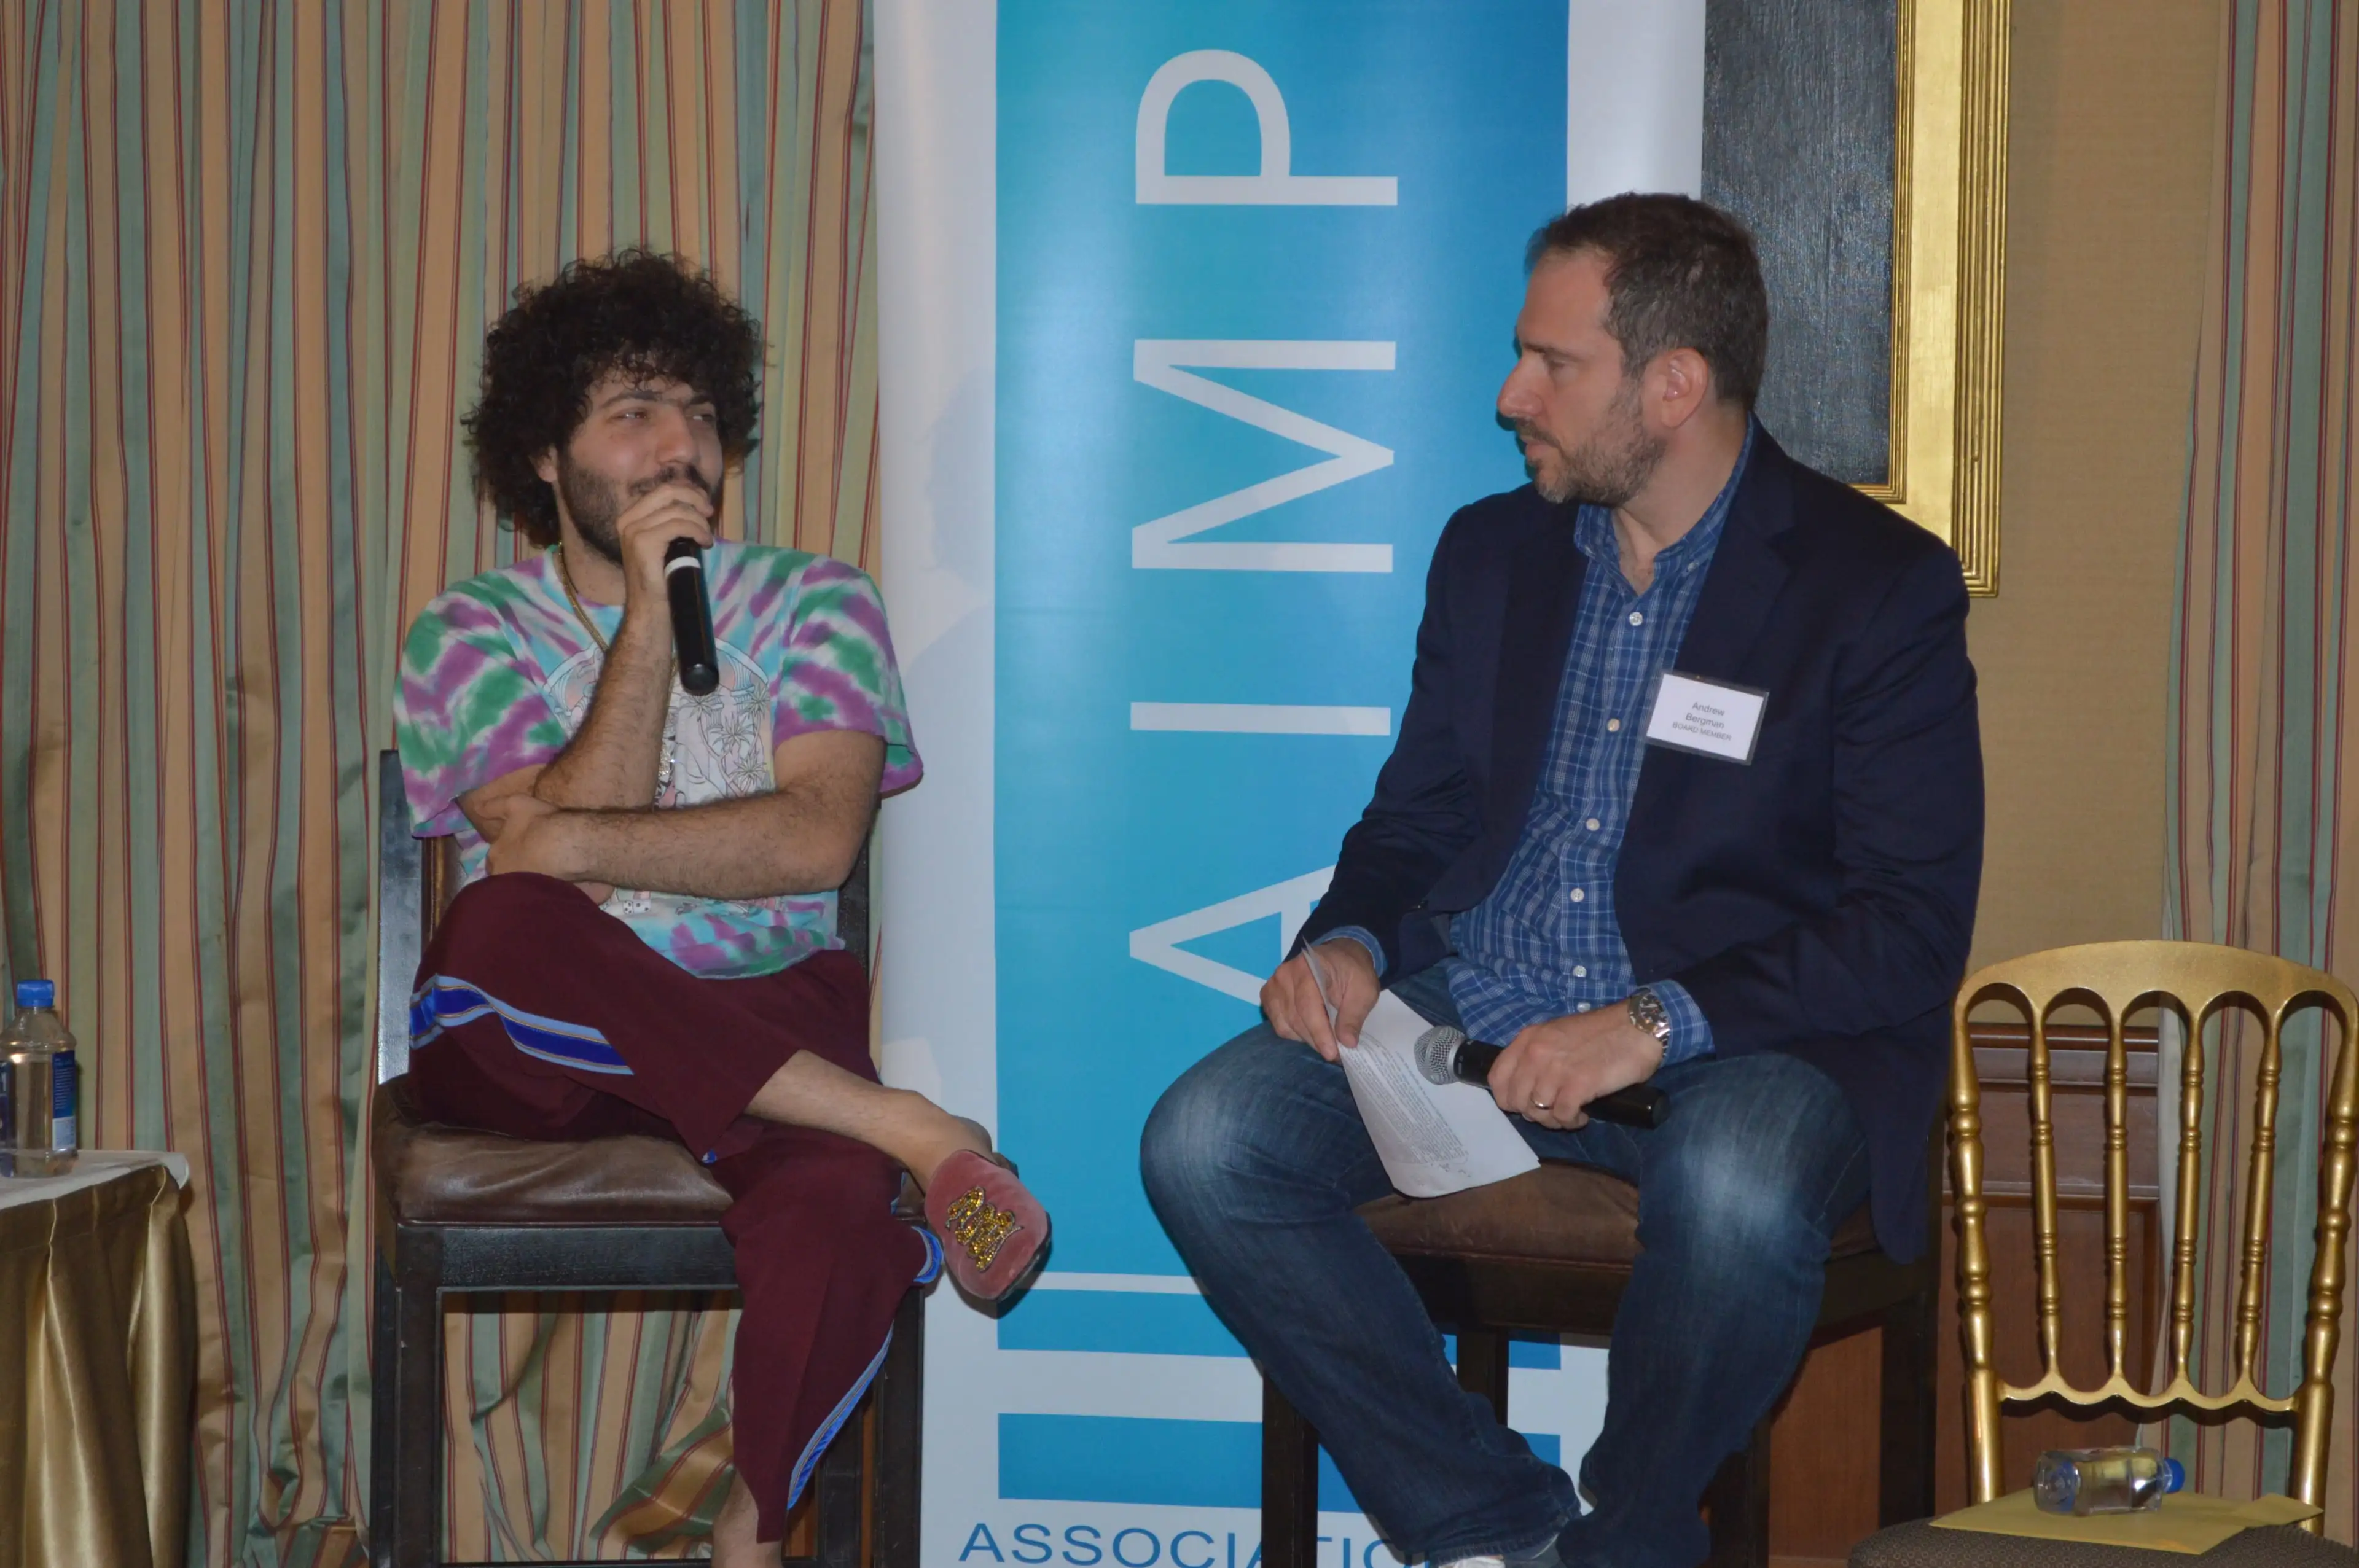 Inside the Association of Independent Music Publishers (AIMP) summit